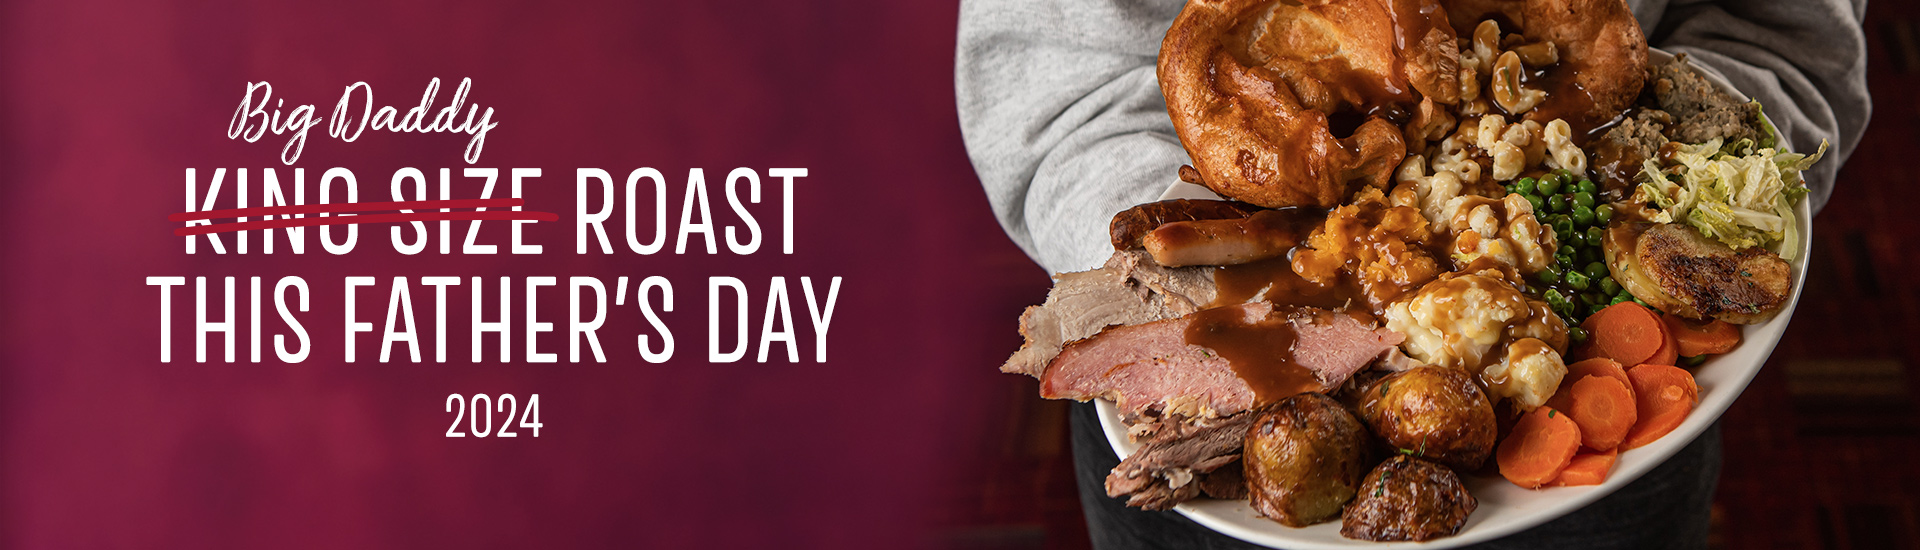 Father’s day carvery in Liverpool, Father’s day at Toby Carvery Stoneycroft